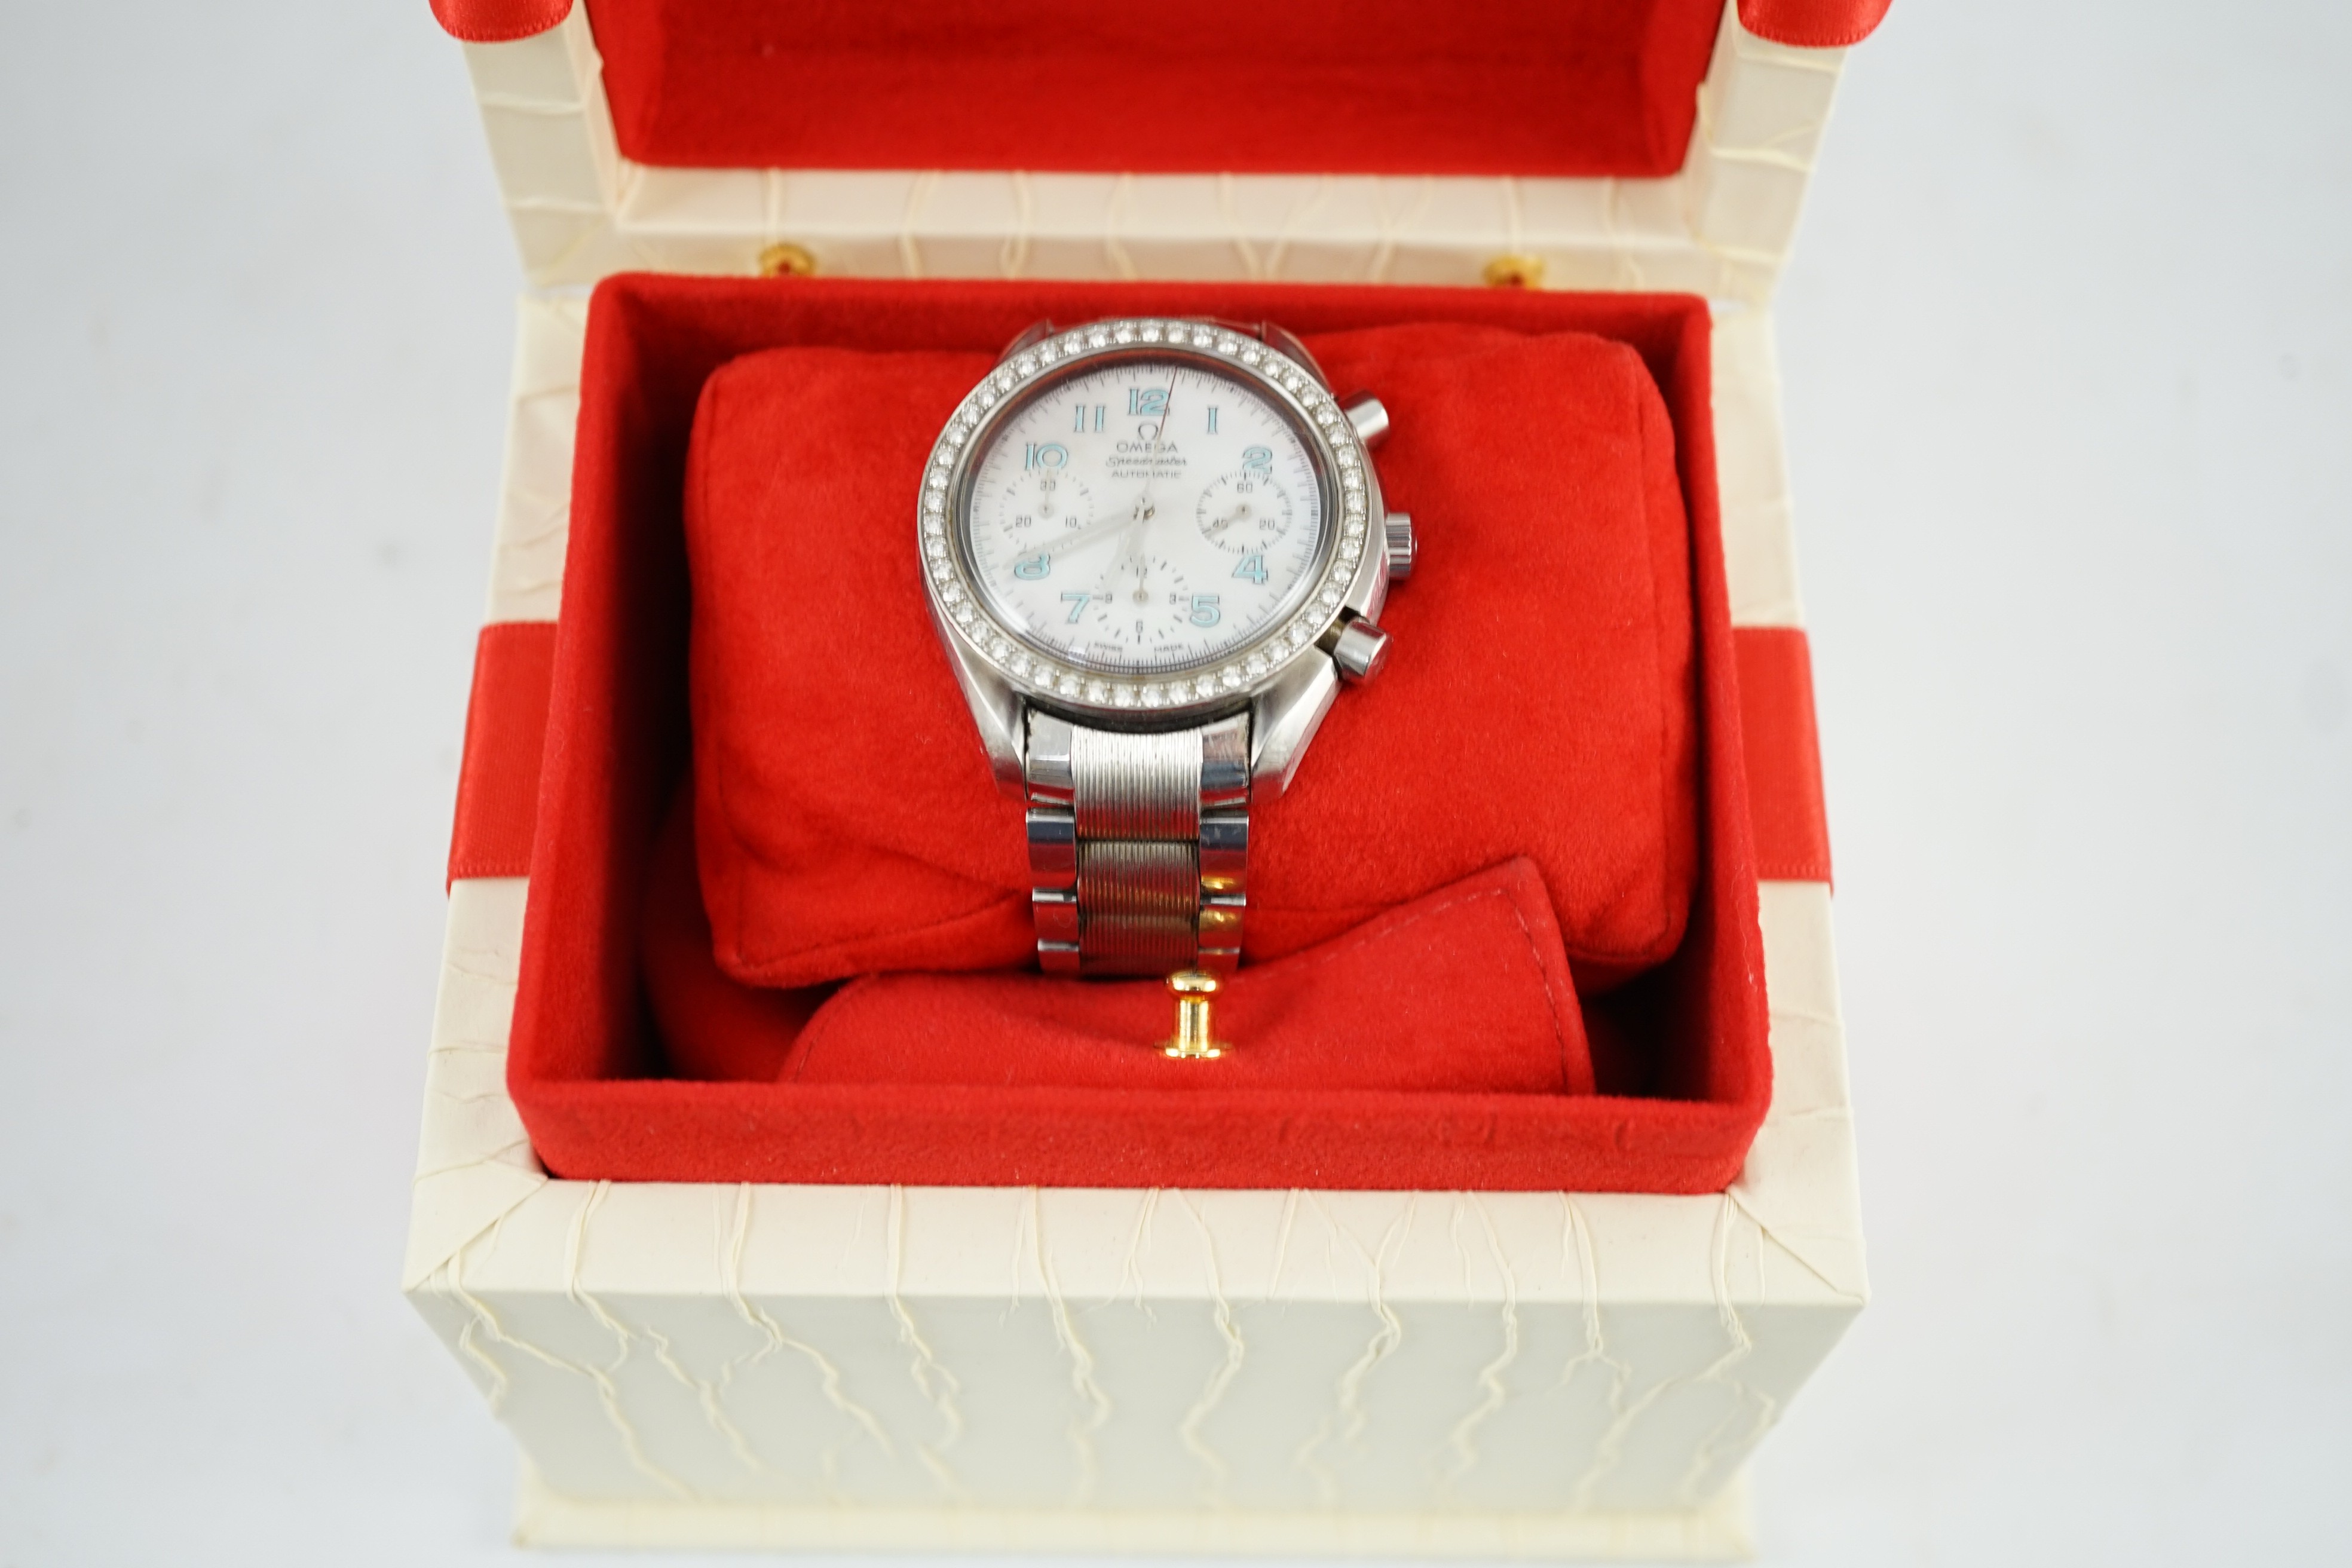 A lady's modern stainless steel Omega Speedmaster automatic wrist watch and bracelet, with mother of pearl Arabic dial and diamond set bezel